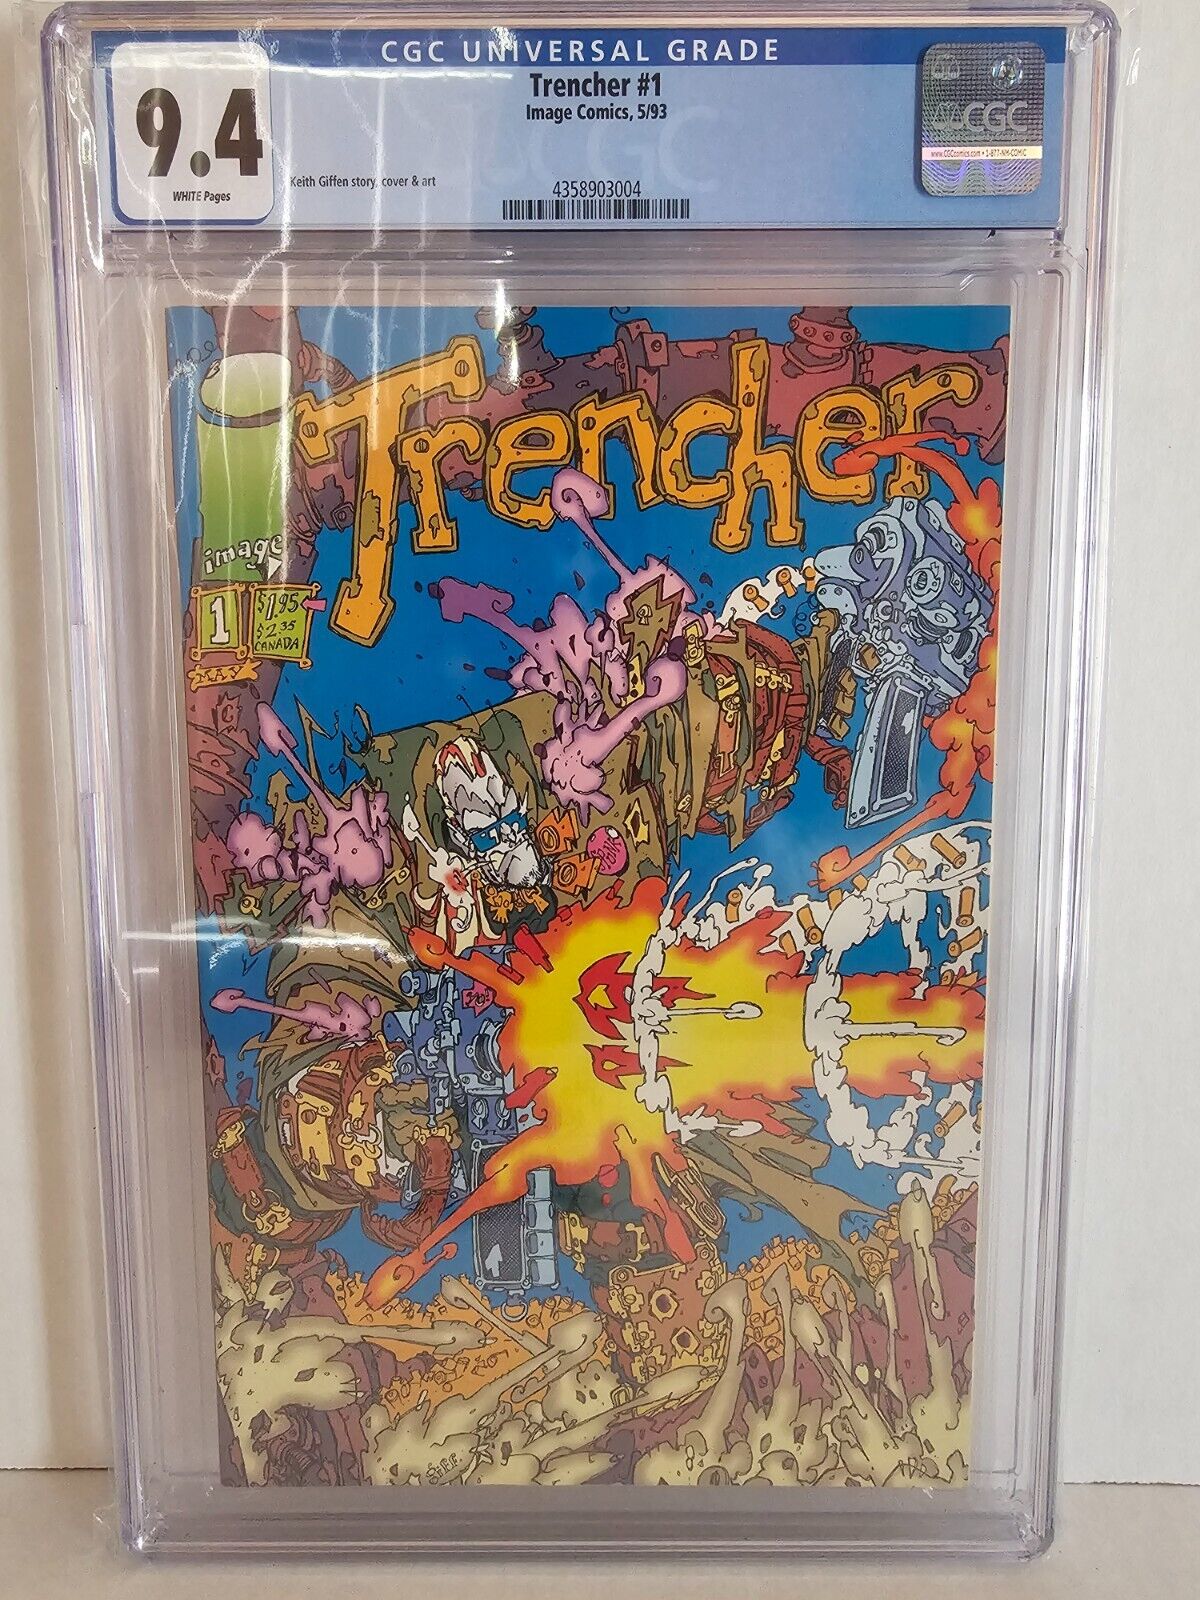 TRENCHER #1  CGC 9.4 1993 *** 1ST APPEARANCE OF TRENCHER *** BRILLIANT ART ***